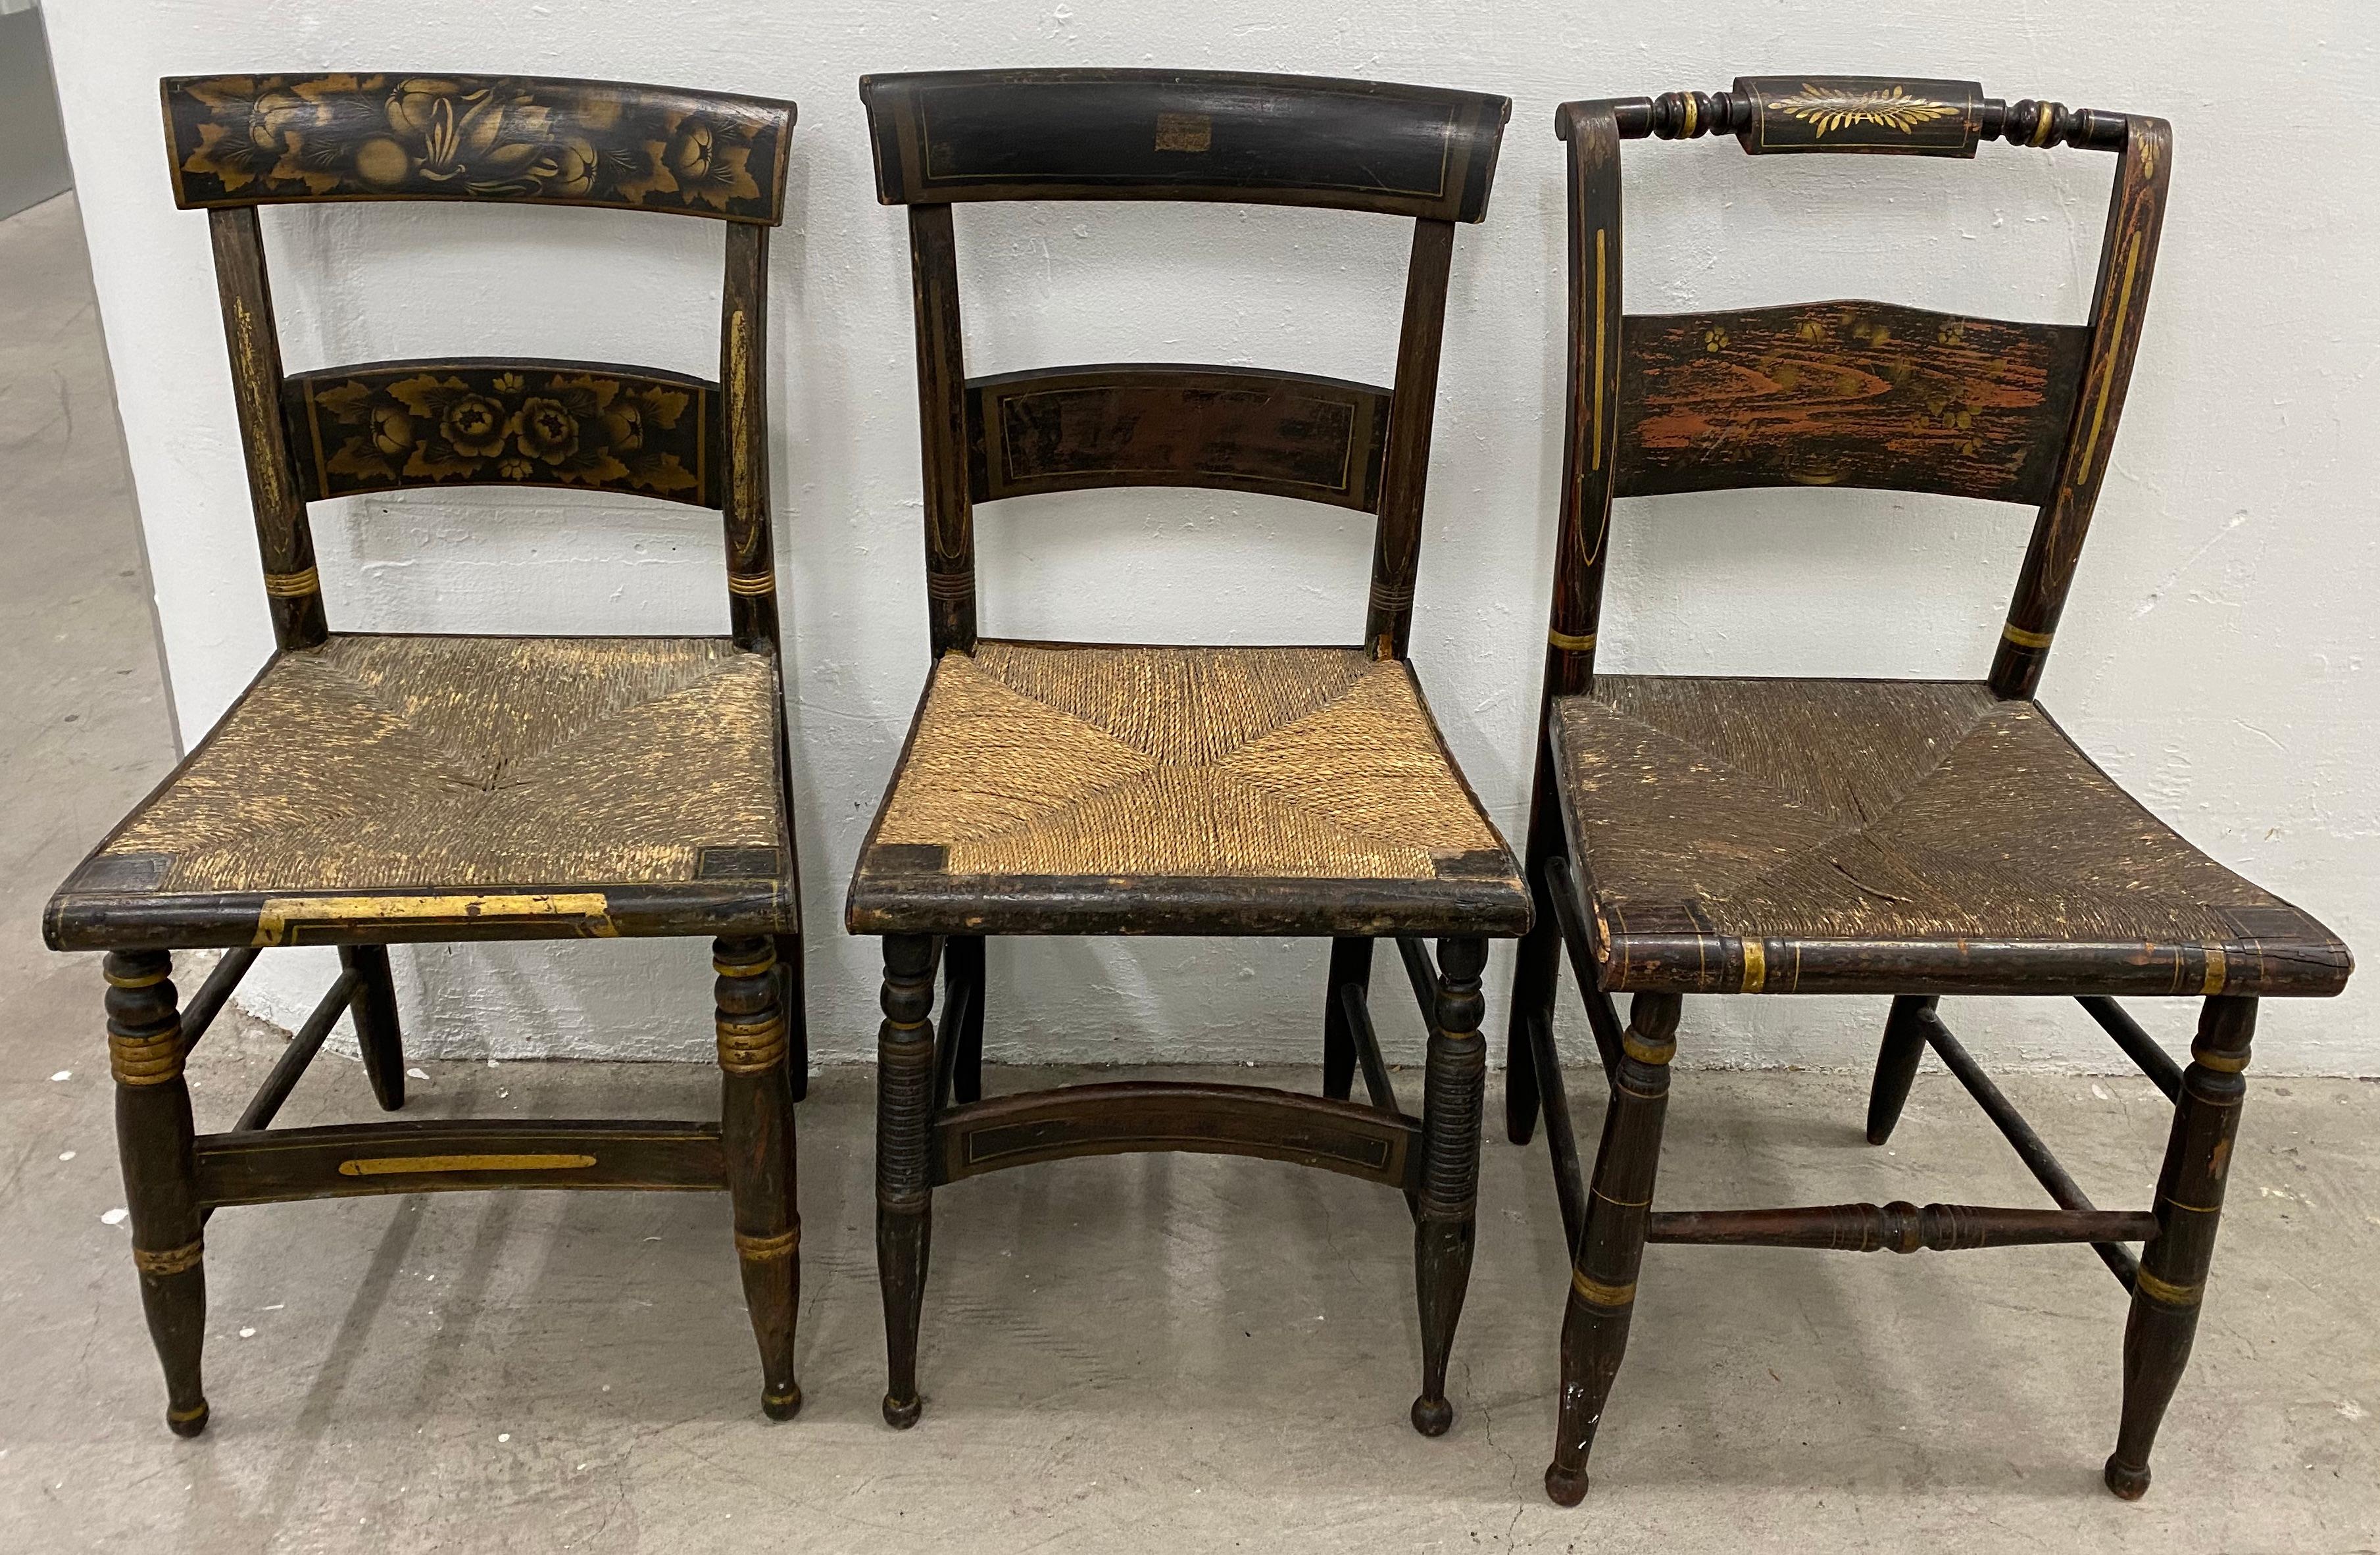 American Empire Lot of Six Mid-19th Century Mis-Matched American Hitchcock Side Chairs